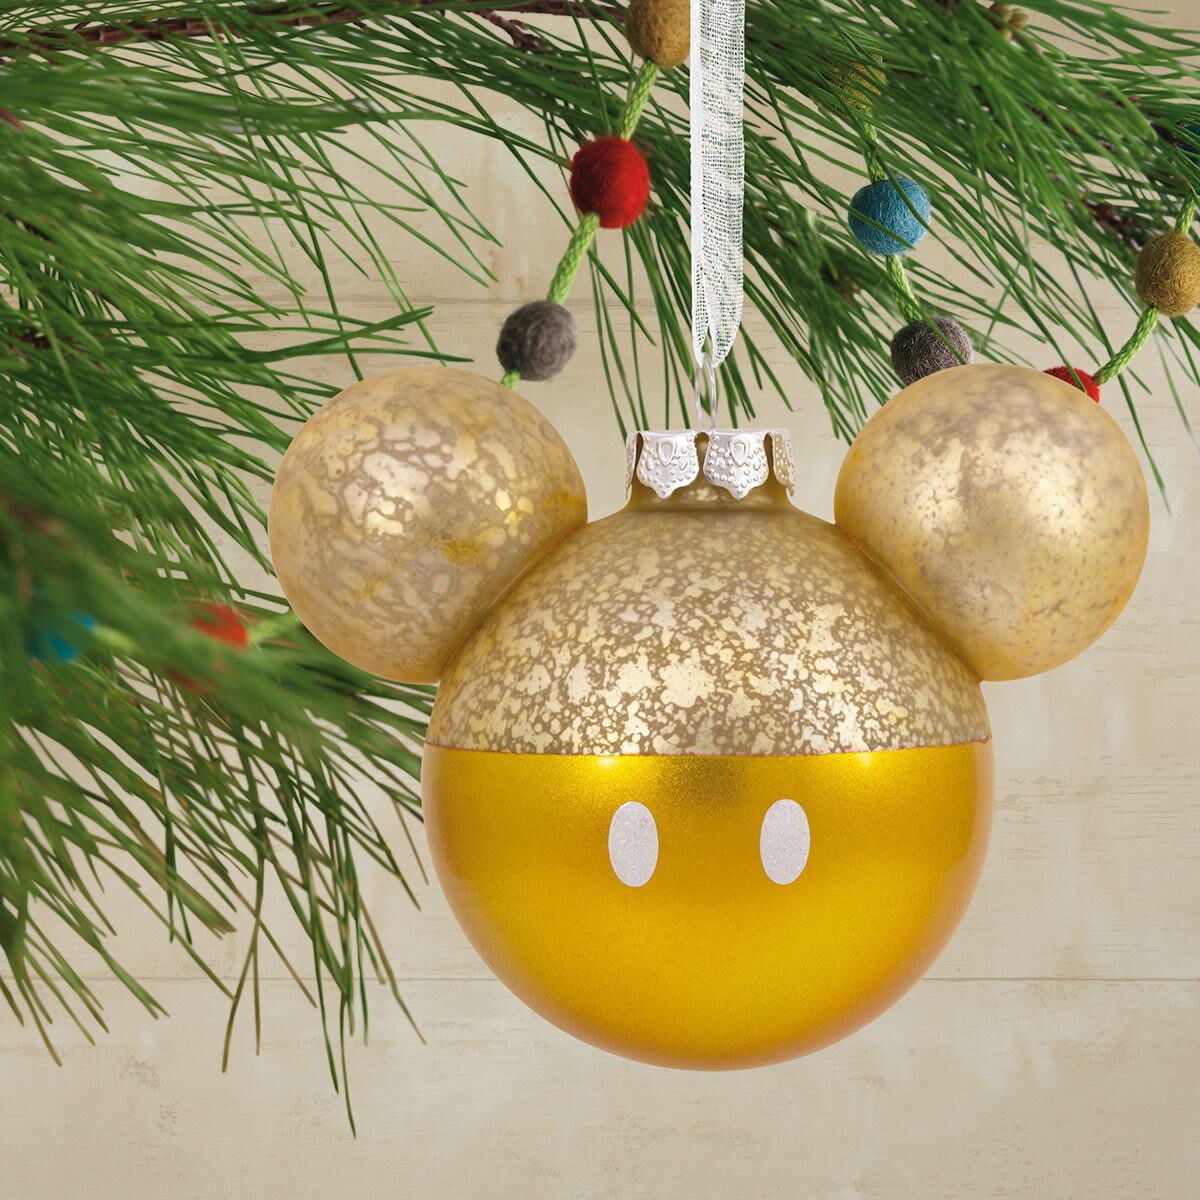 Buy Mickey Icon Ornaments Set of 4 Gold Lifestyle Image at Costco.co.uk